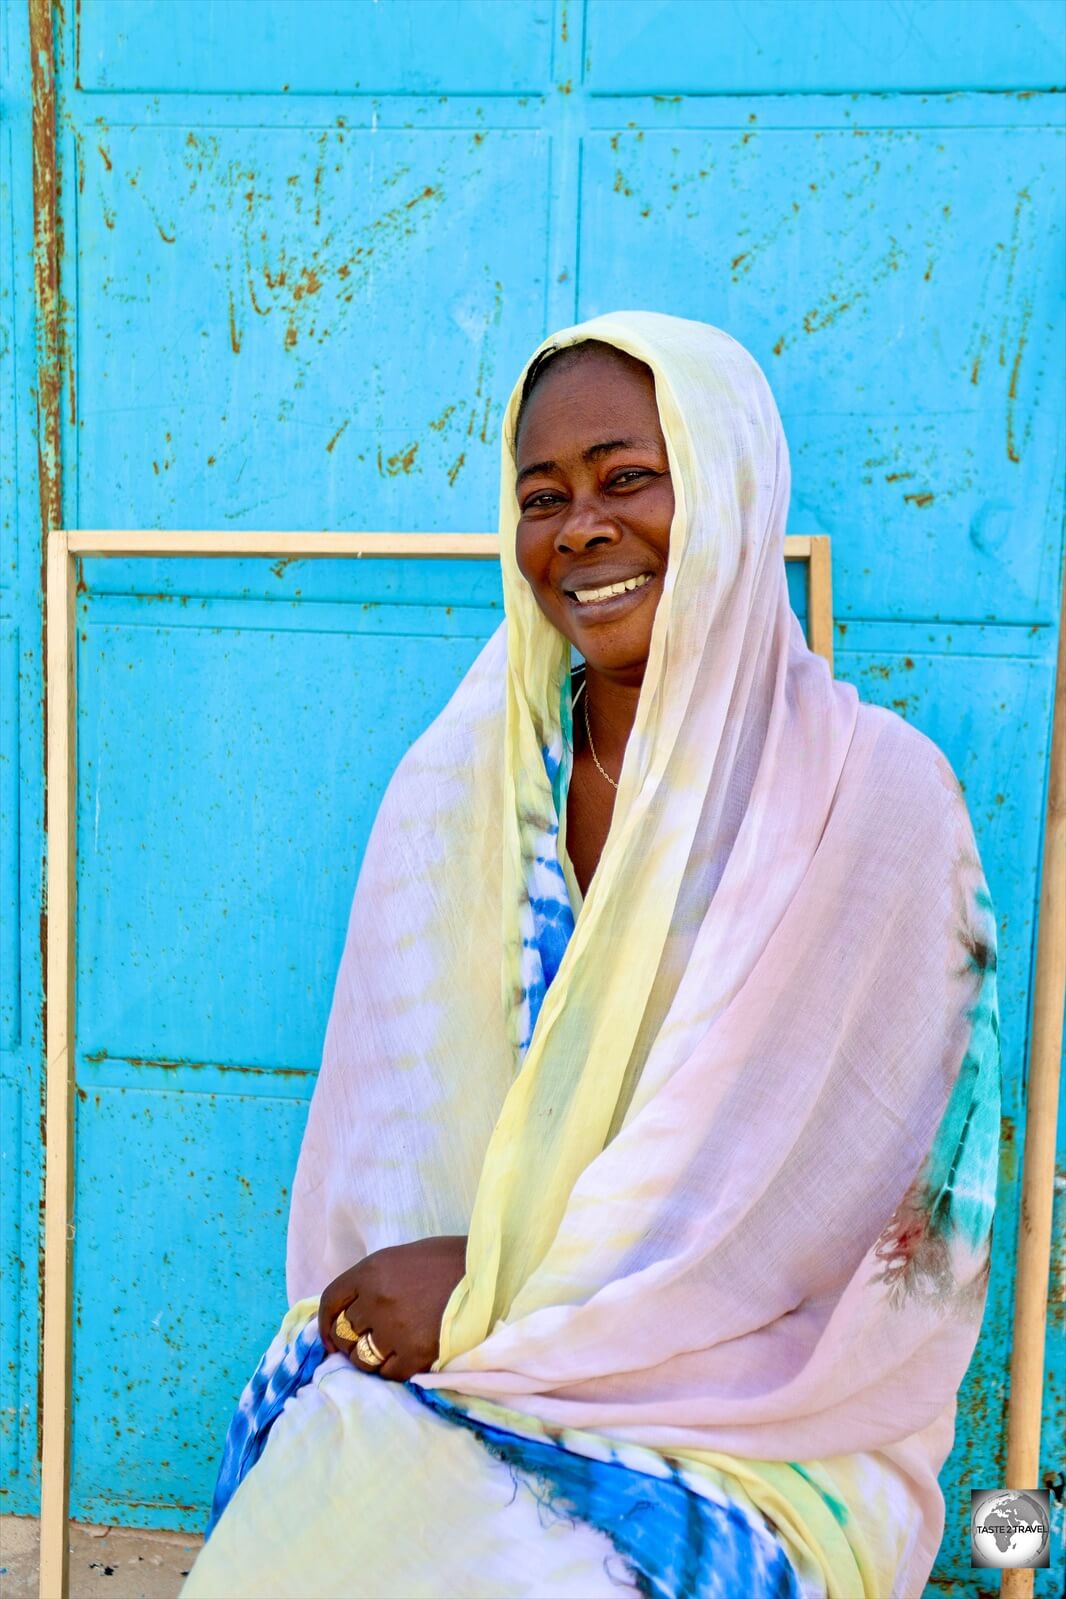 Visitors can expect to be greeted by warm smiles in Cape Verde.